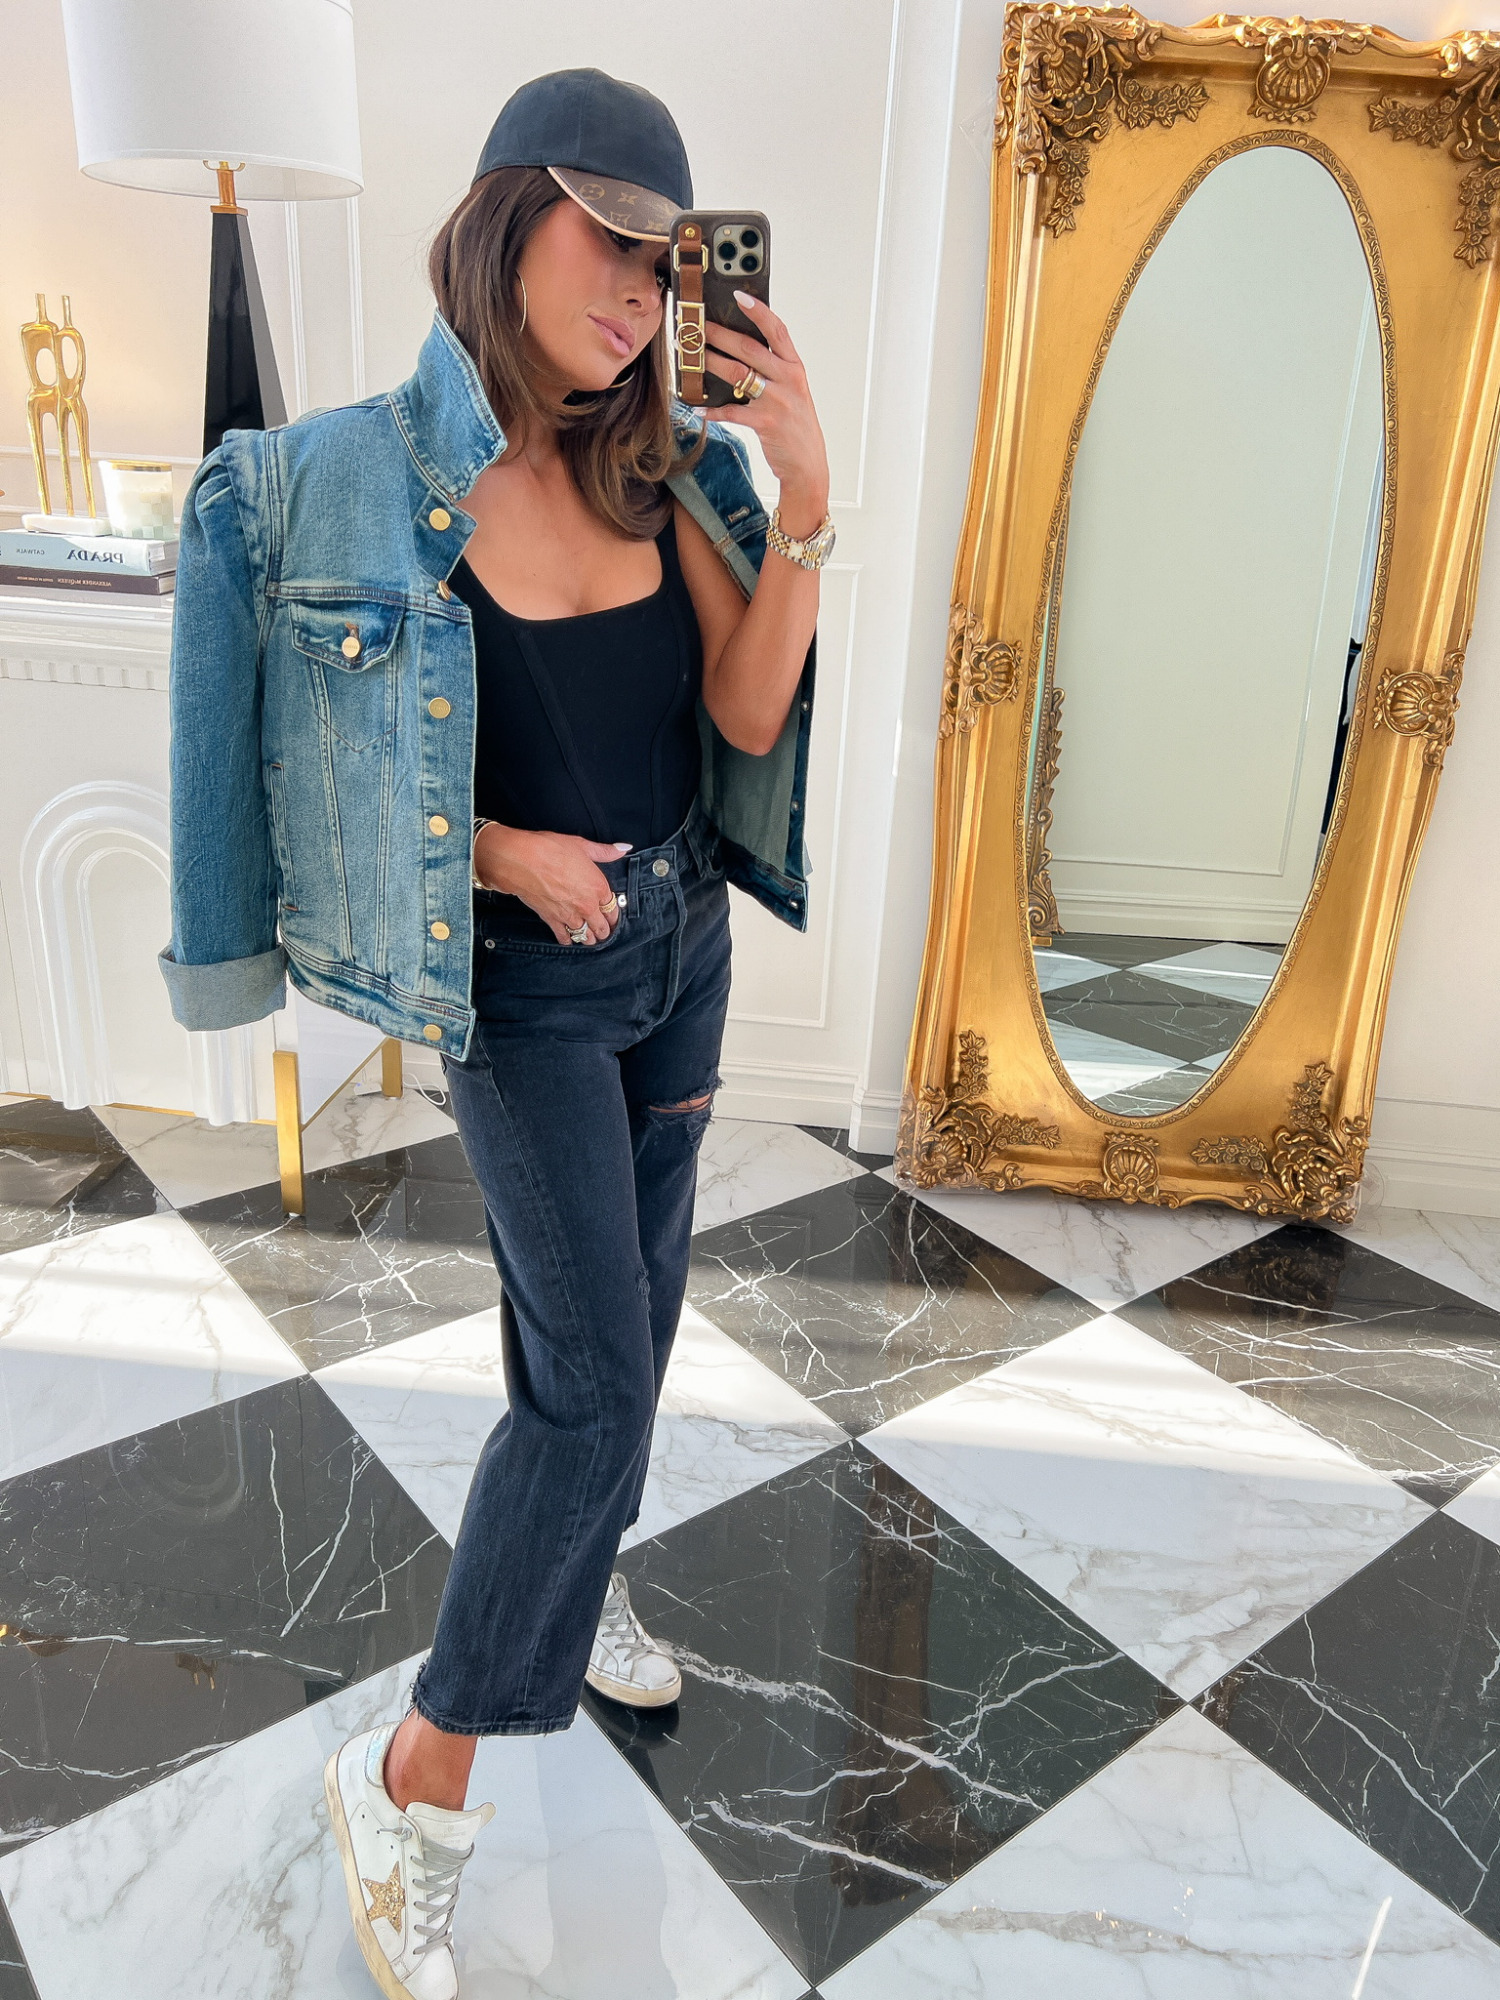 Express Fall Fashion 2022, Casual Fall Outfit Ideas Emily Gemma, Golden Goose Superstar Low Top Sneaker, Emily Gemma Fashion Blogger